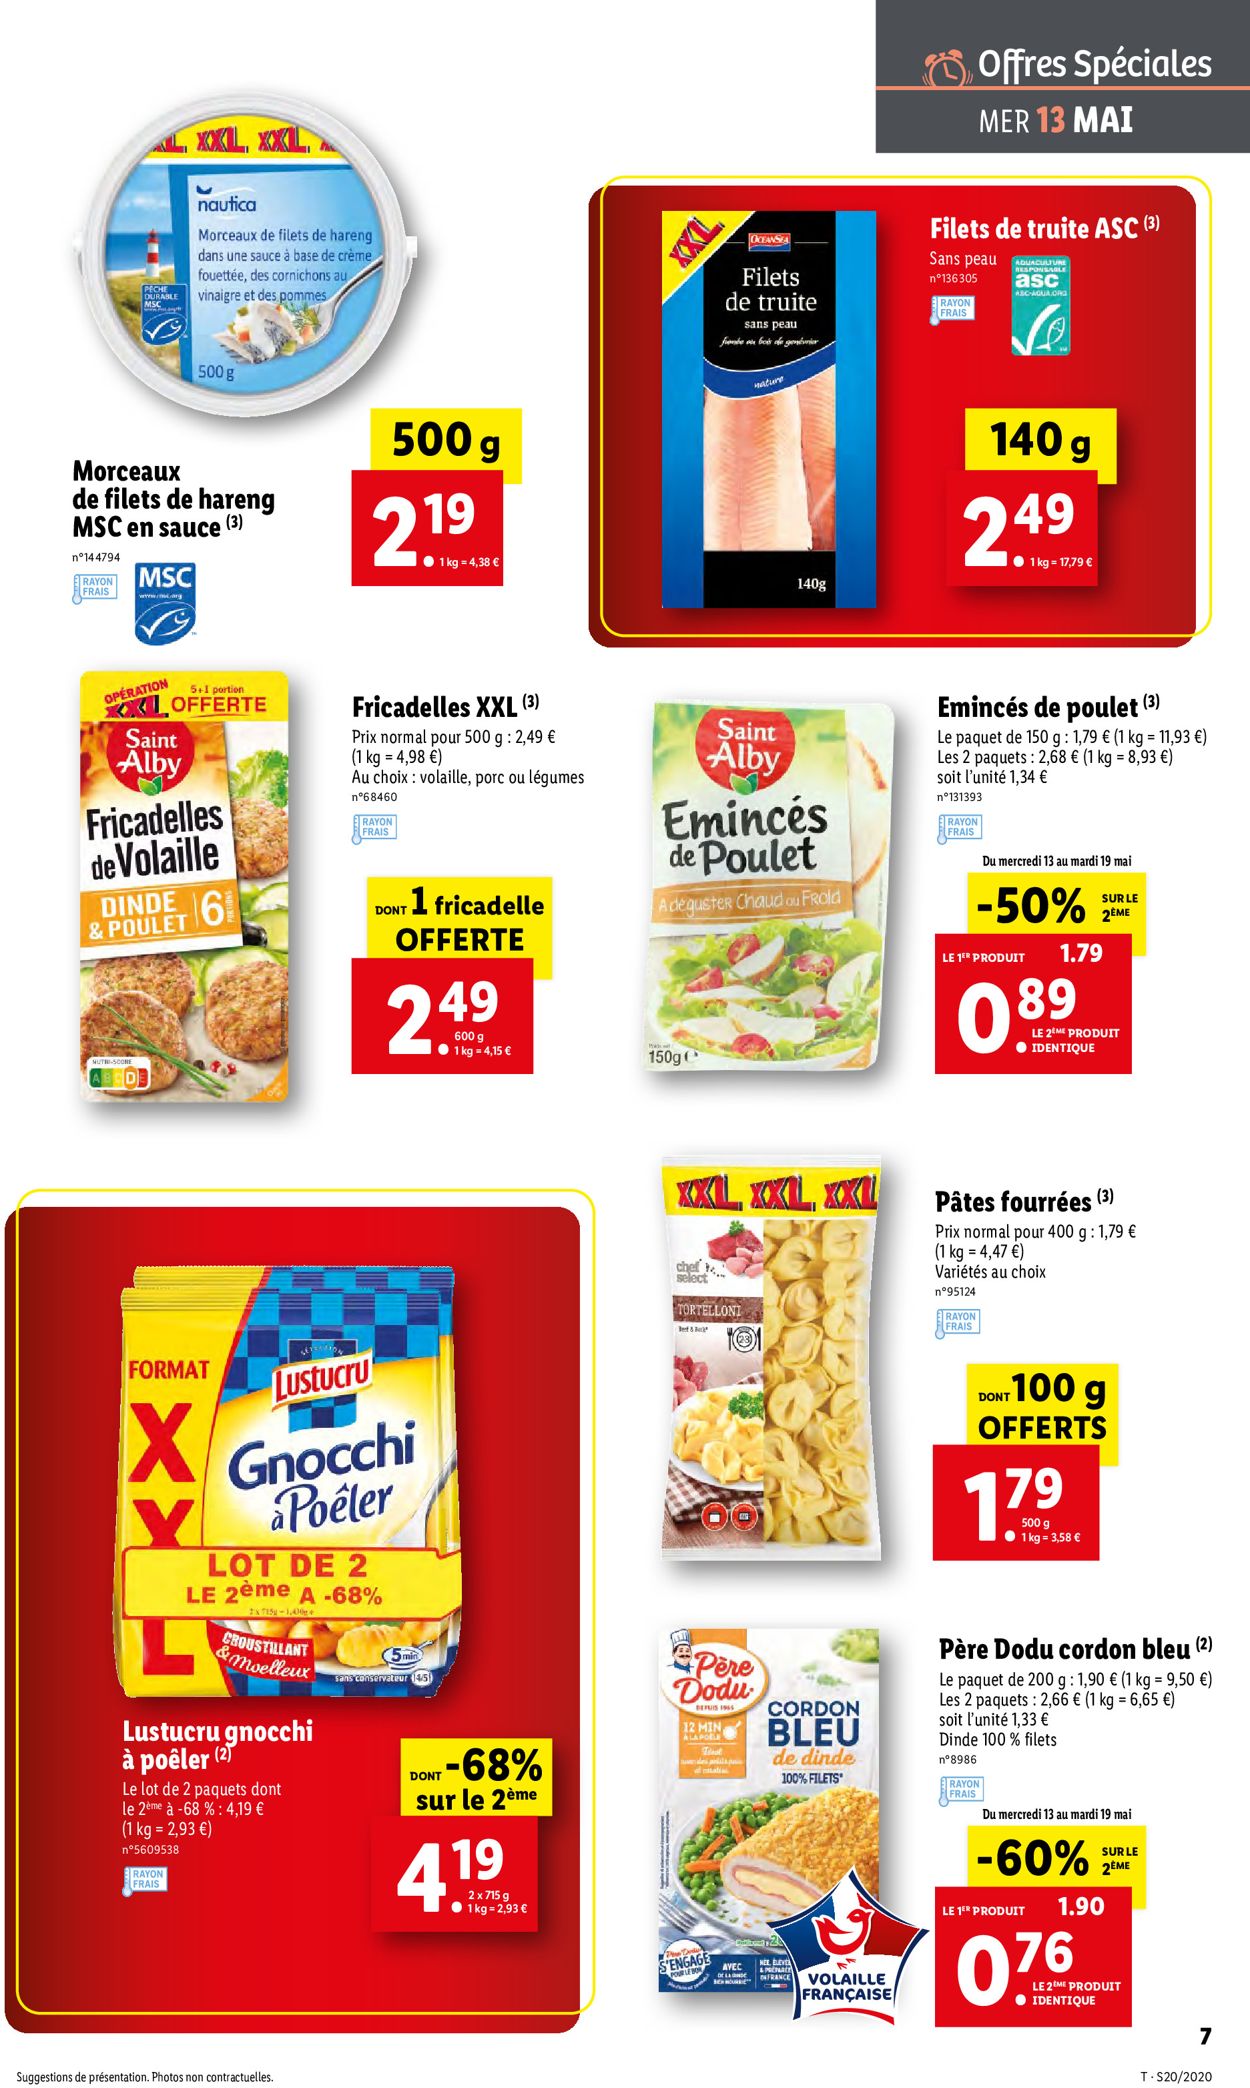 Lidl Catalogue - 13.05-19.05.2020 (Page 7)